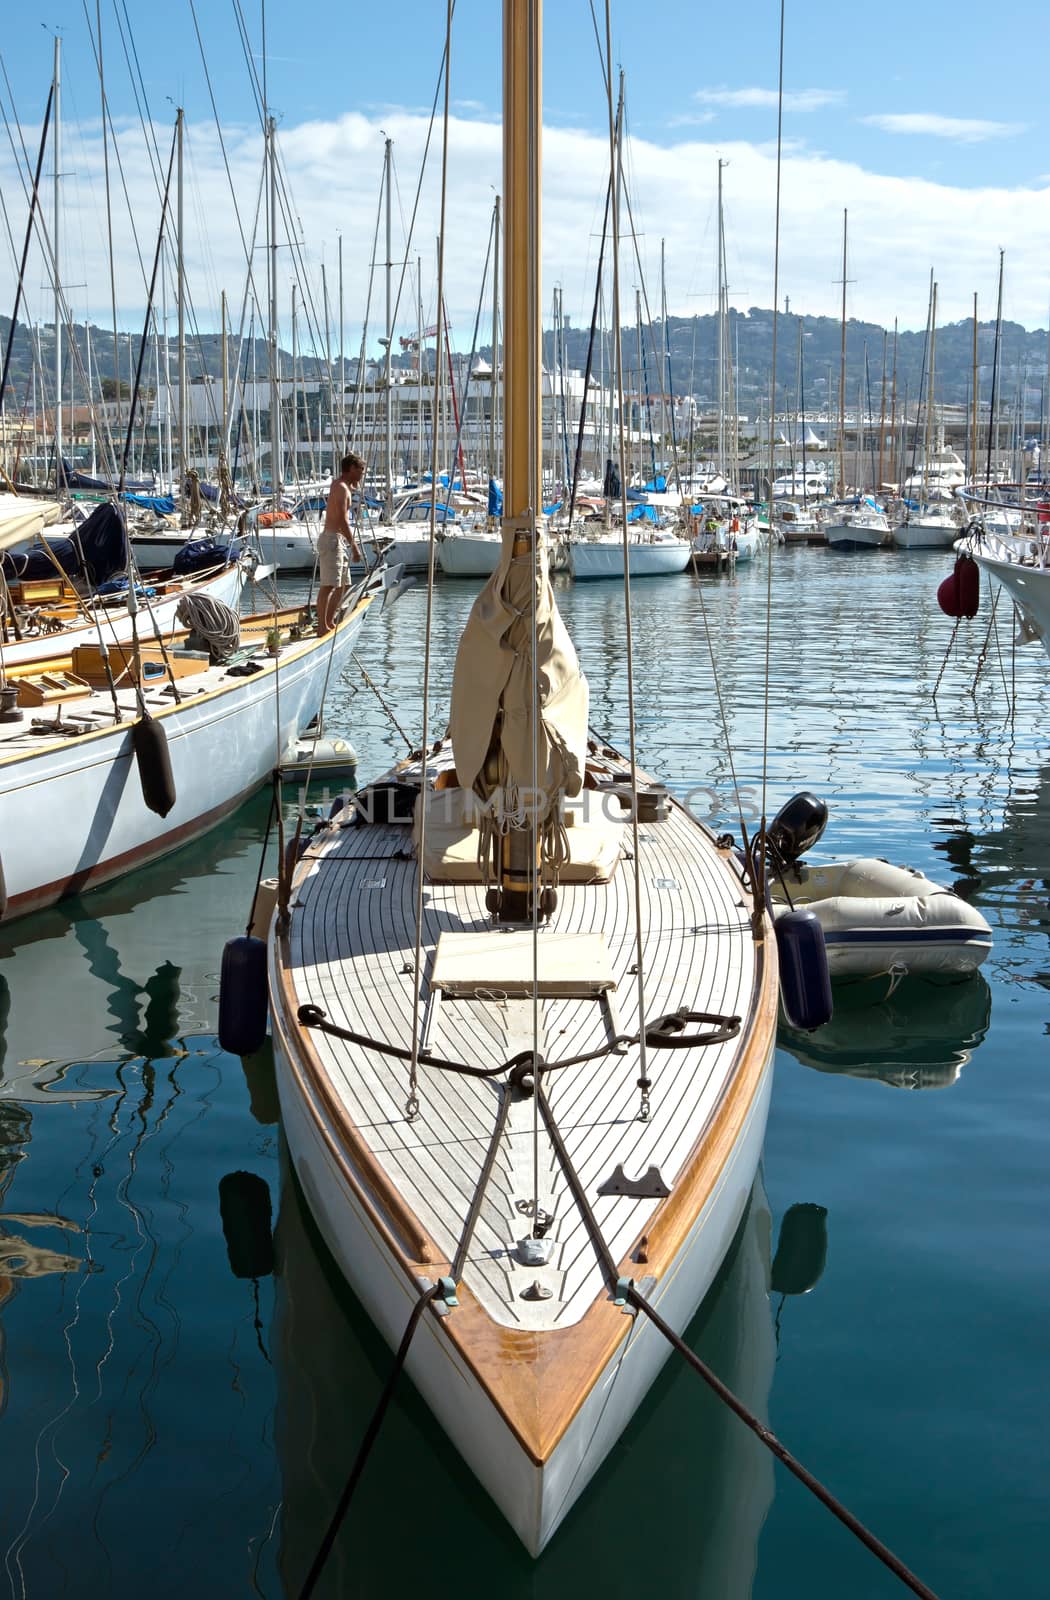 CANNES, FRANCE - MAY 6: Sailing boats moored in the port on May 6, 2013 in Cannes, France.

Cannes, France - May 6, 2013: Sailing boats moored in the port of Cannes. A man stands on a yacht and looks into the distance.